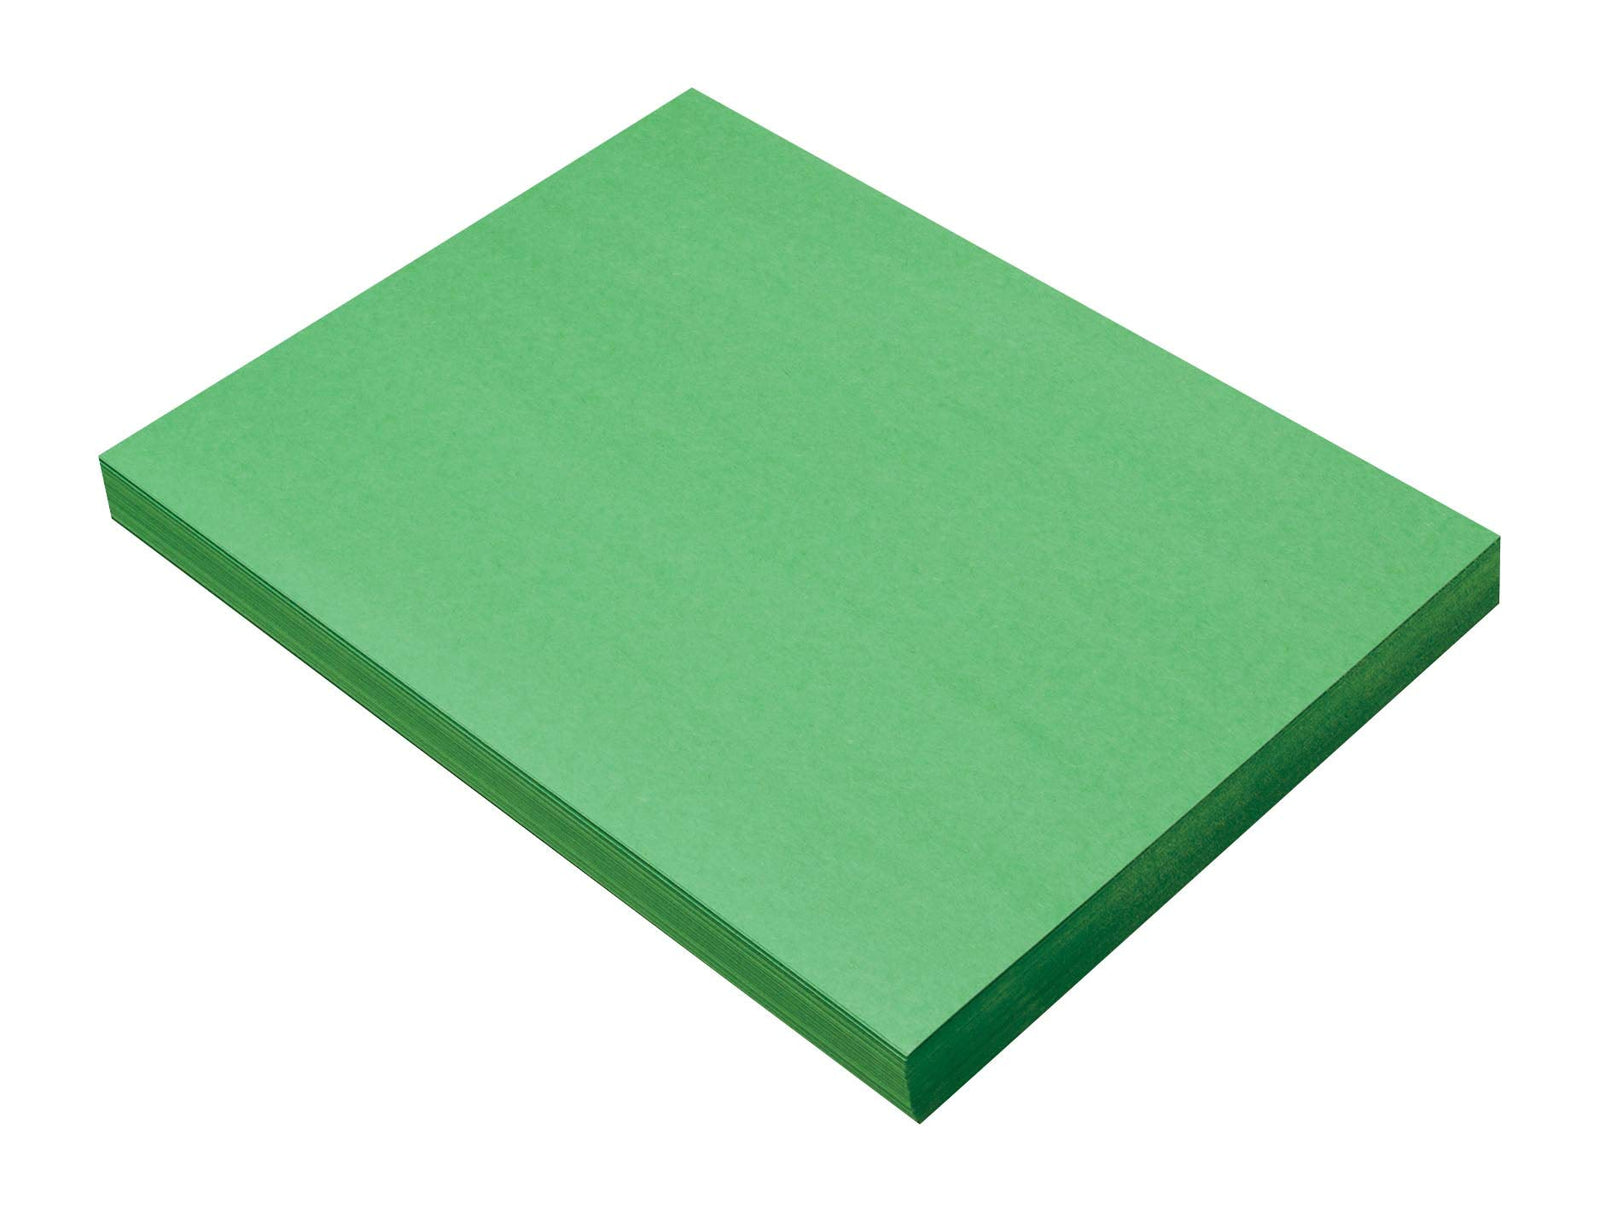 SunWorks Heavyweight Construction Paper, 9 x 12 Inches, Holiday Green, 100 Sheets